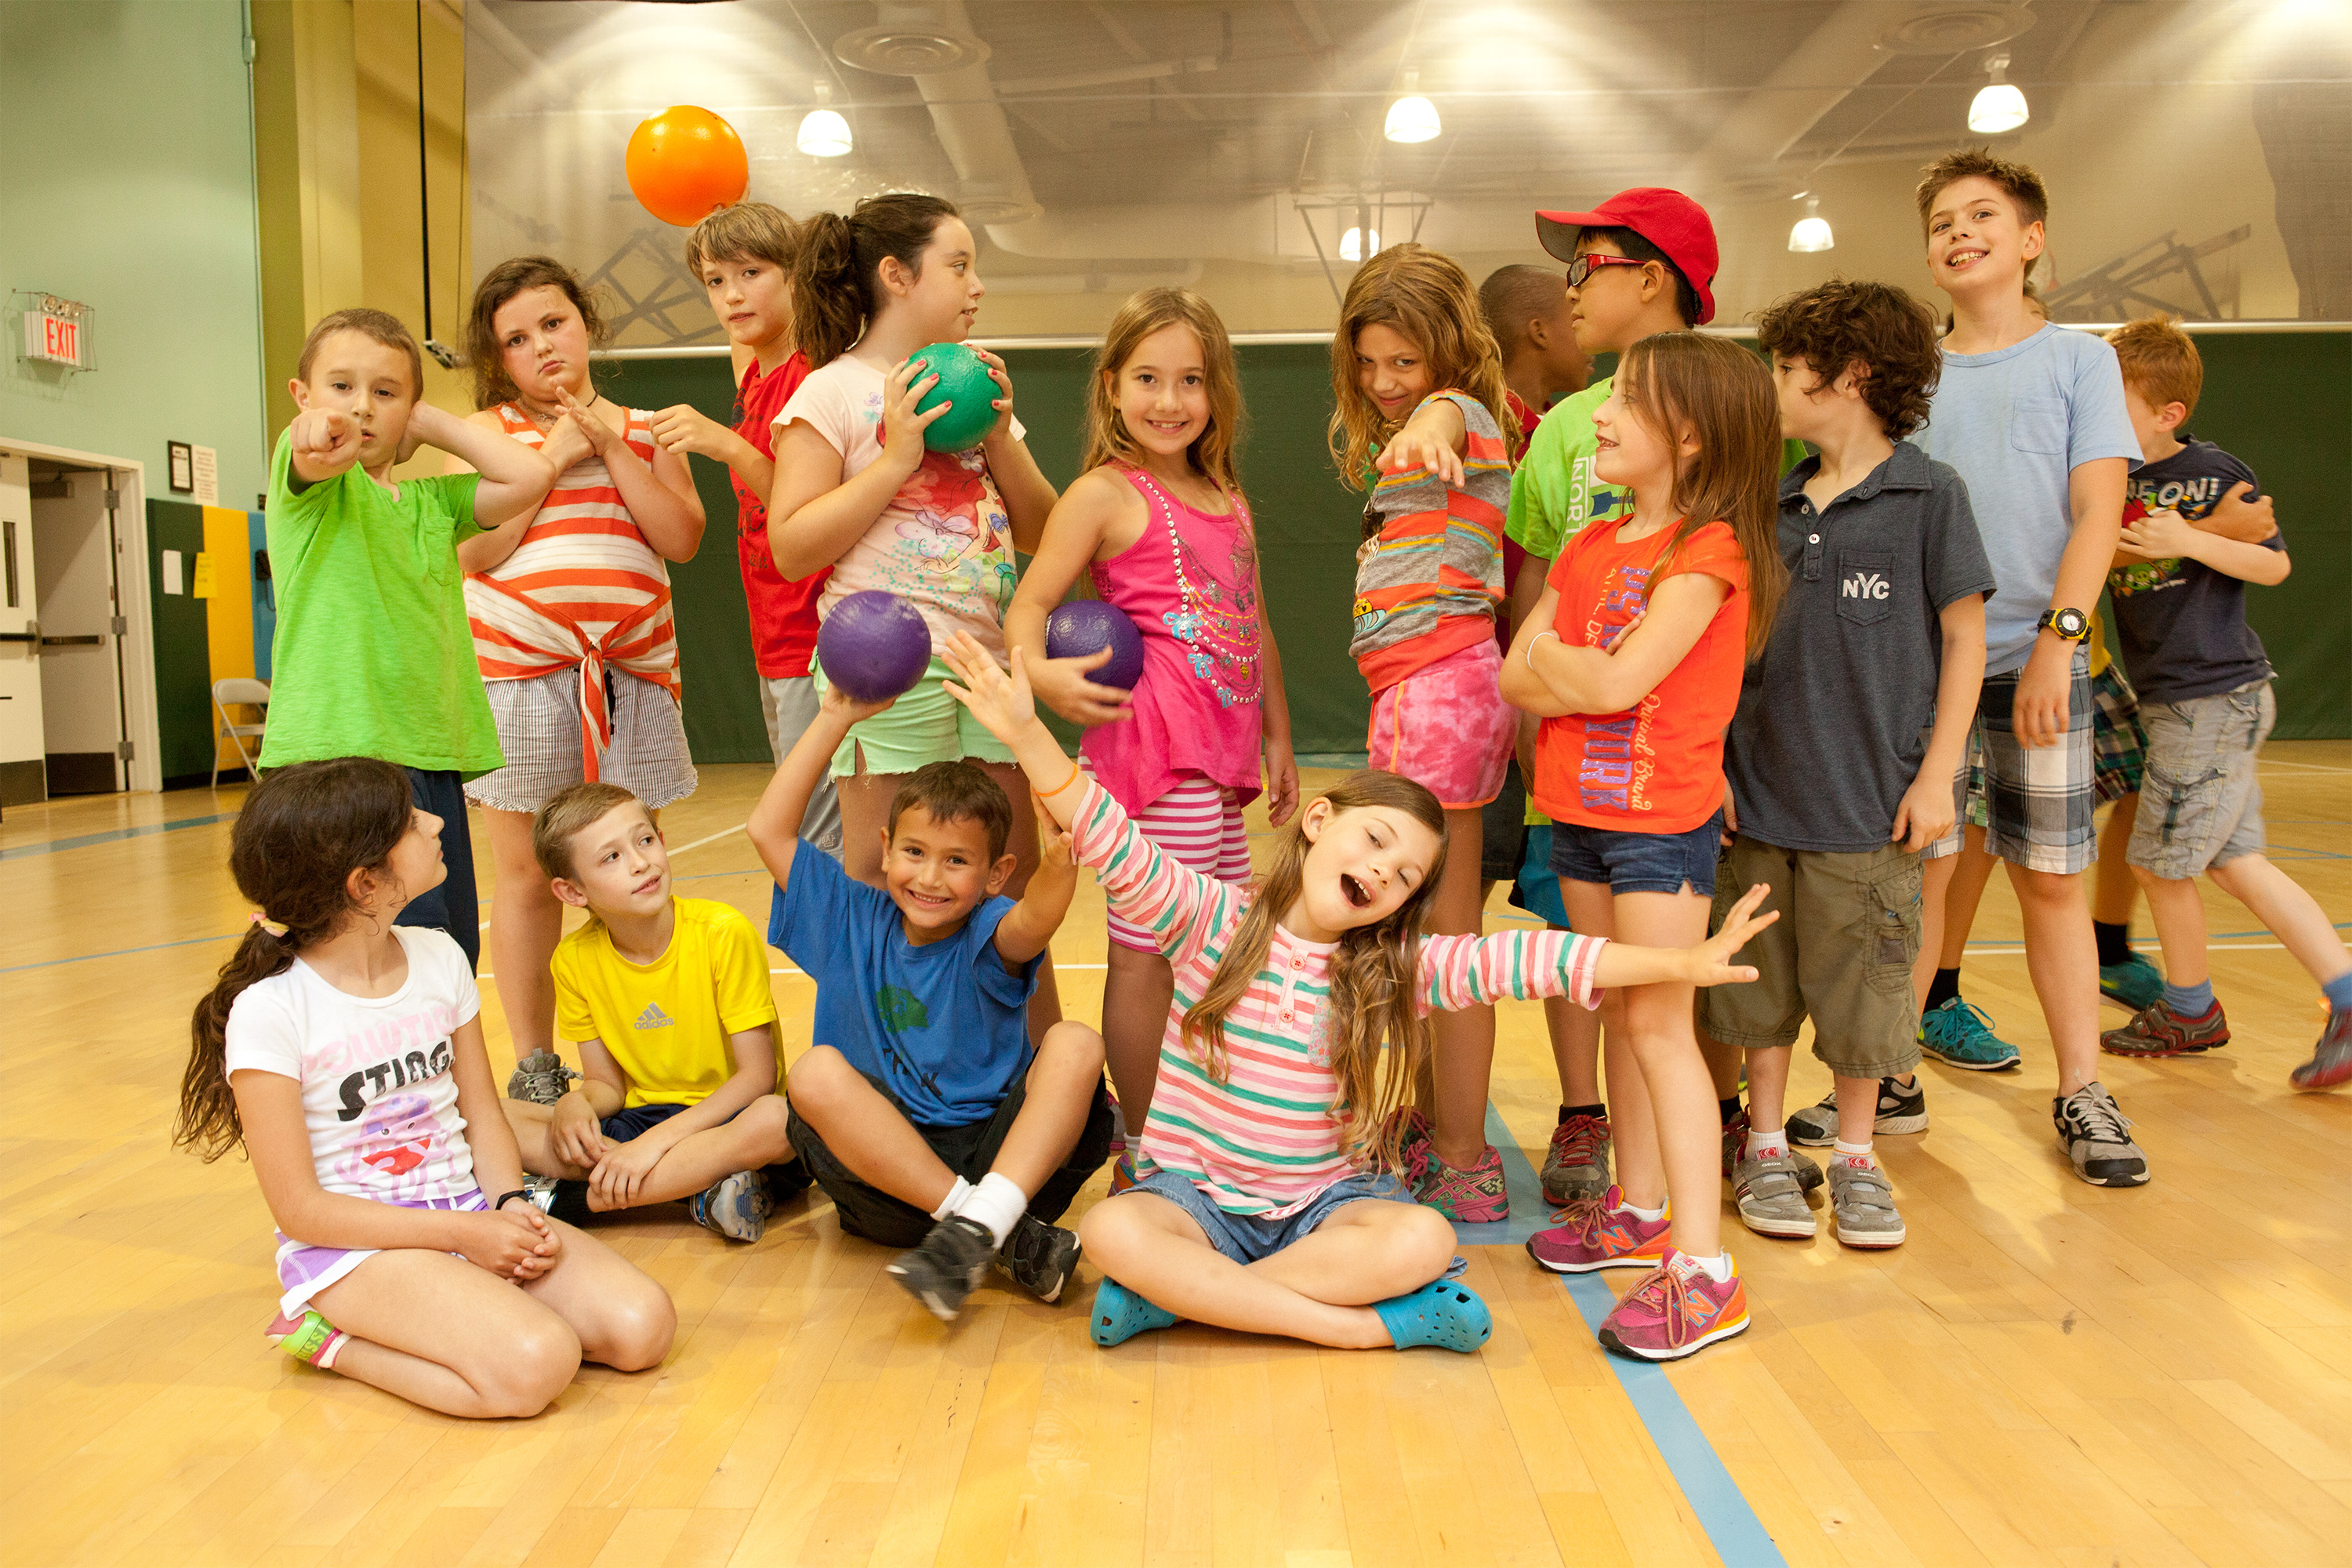 NYC PHYSIQUE SUMMER DAY CAMP at the Pine St School | Physique Swim School